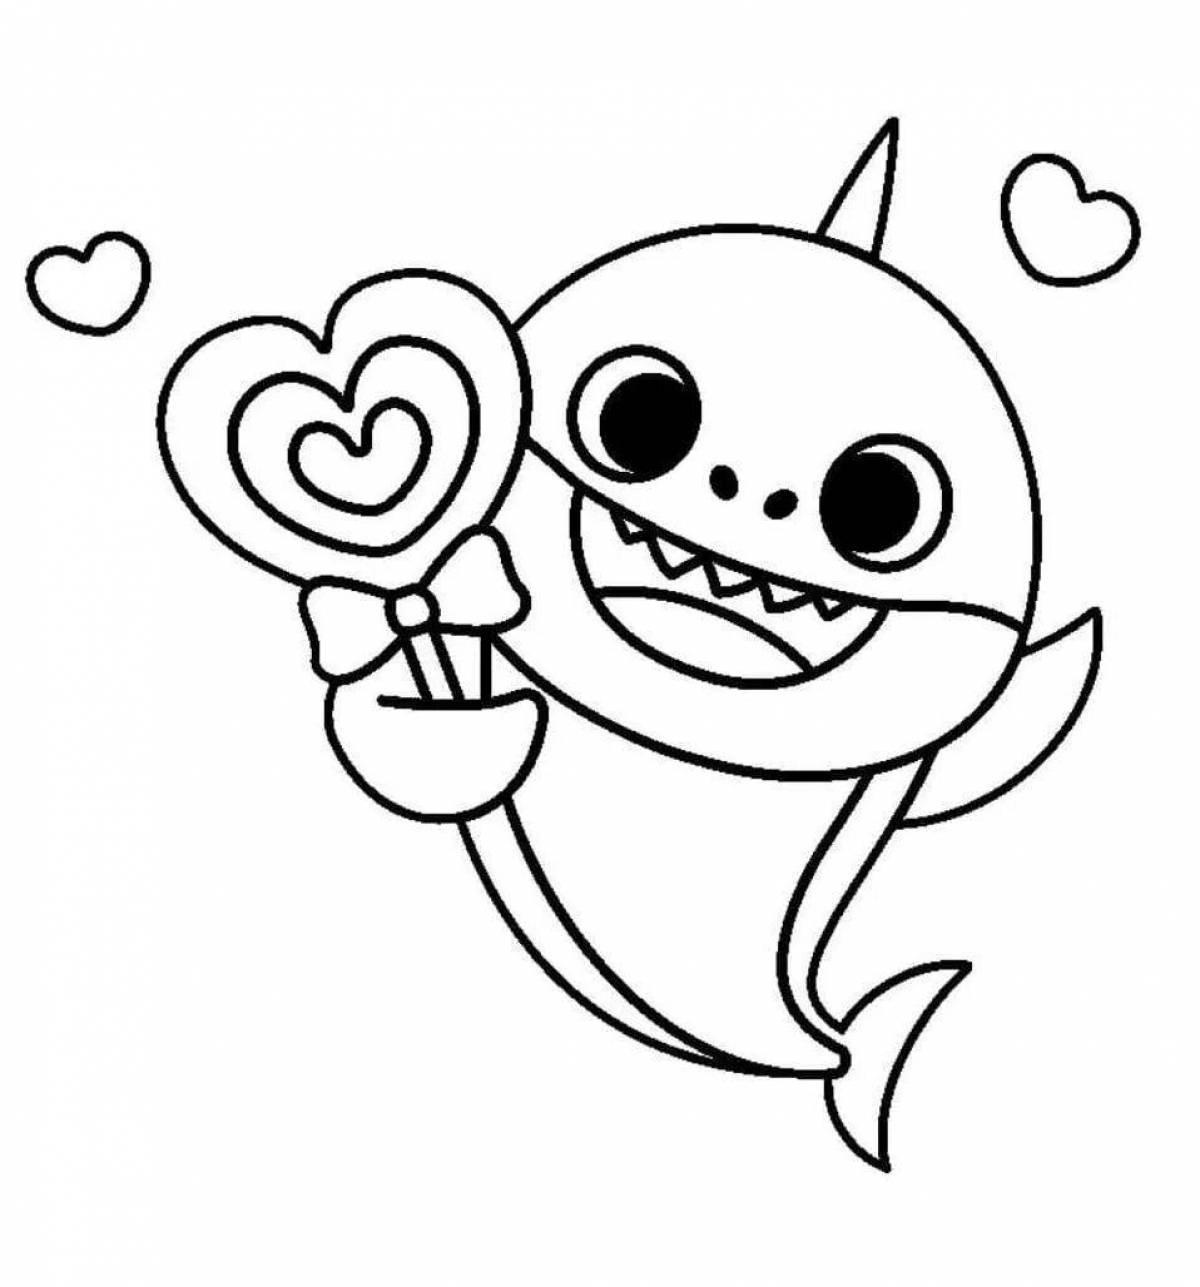 Glorious shark coloring page